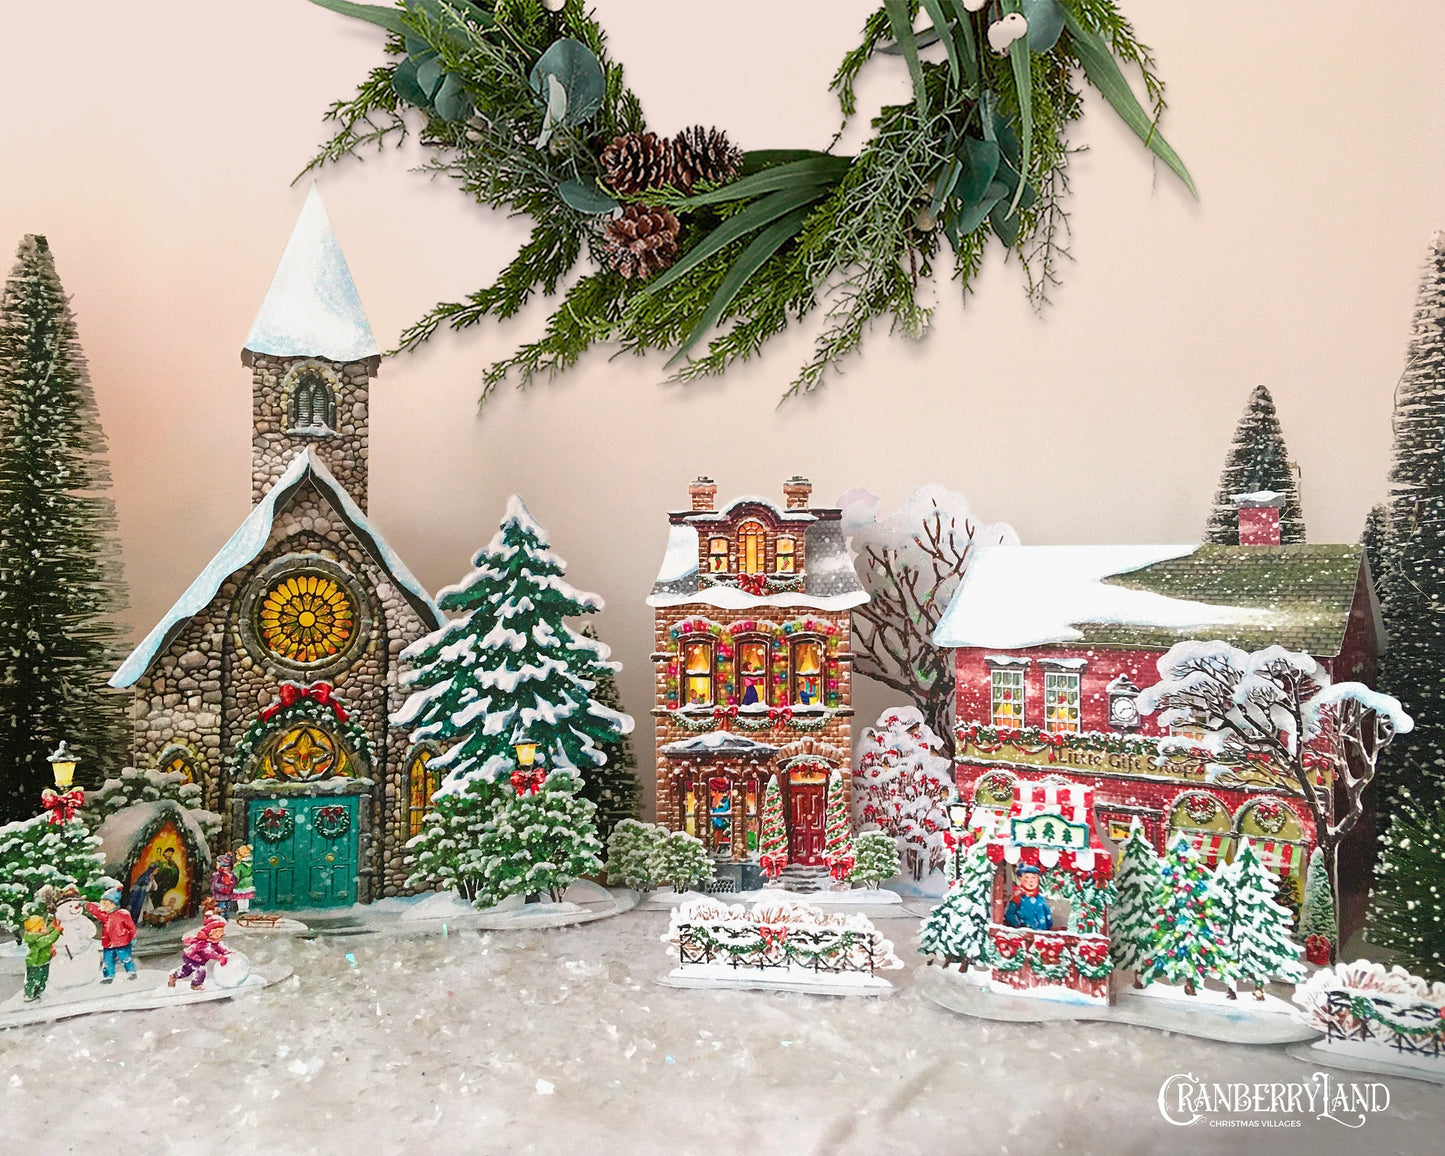 Mr. Gus's Little Christmas Stand - Christmas Village Houses